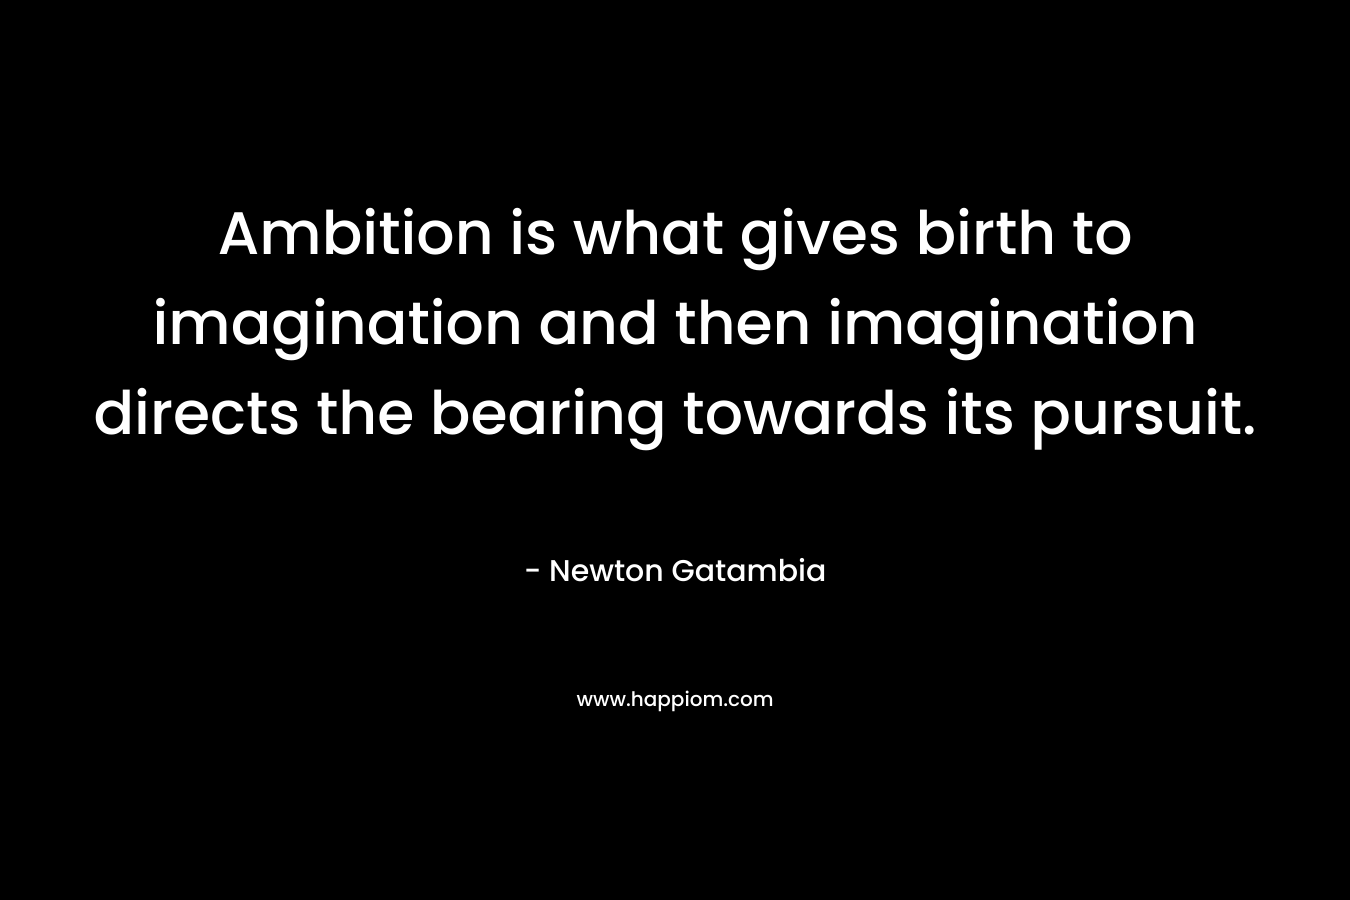 Ambition is what gives birth to imagination and then imagination directs the bearing towards its pursuit. – Newton Gatambia